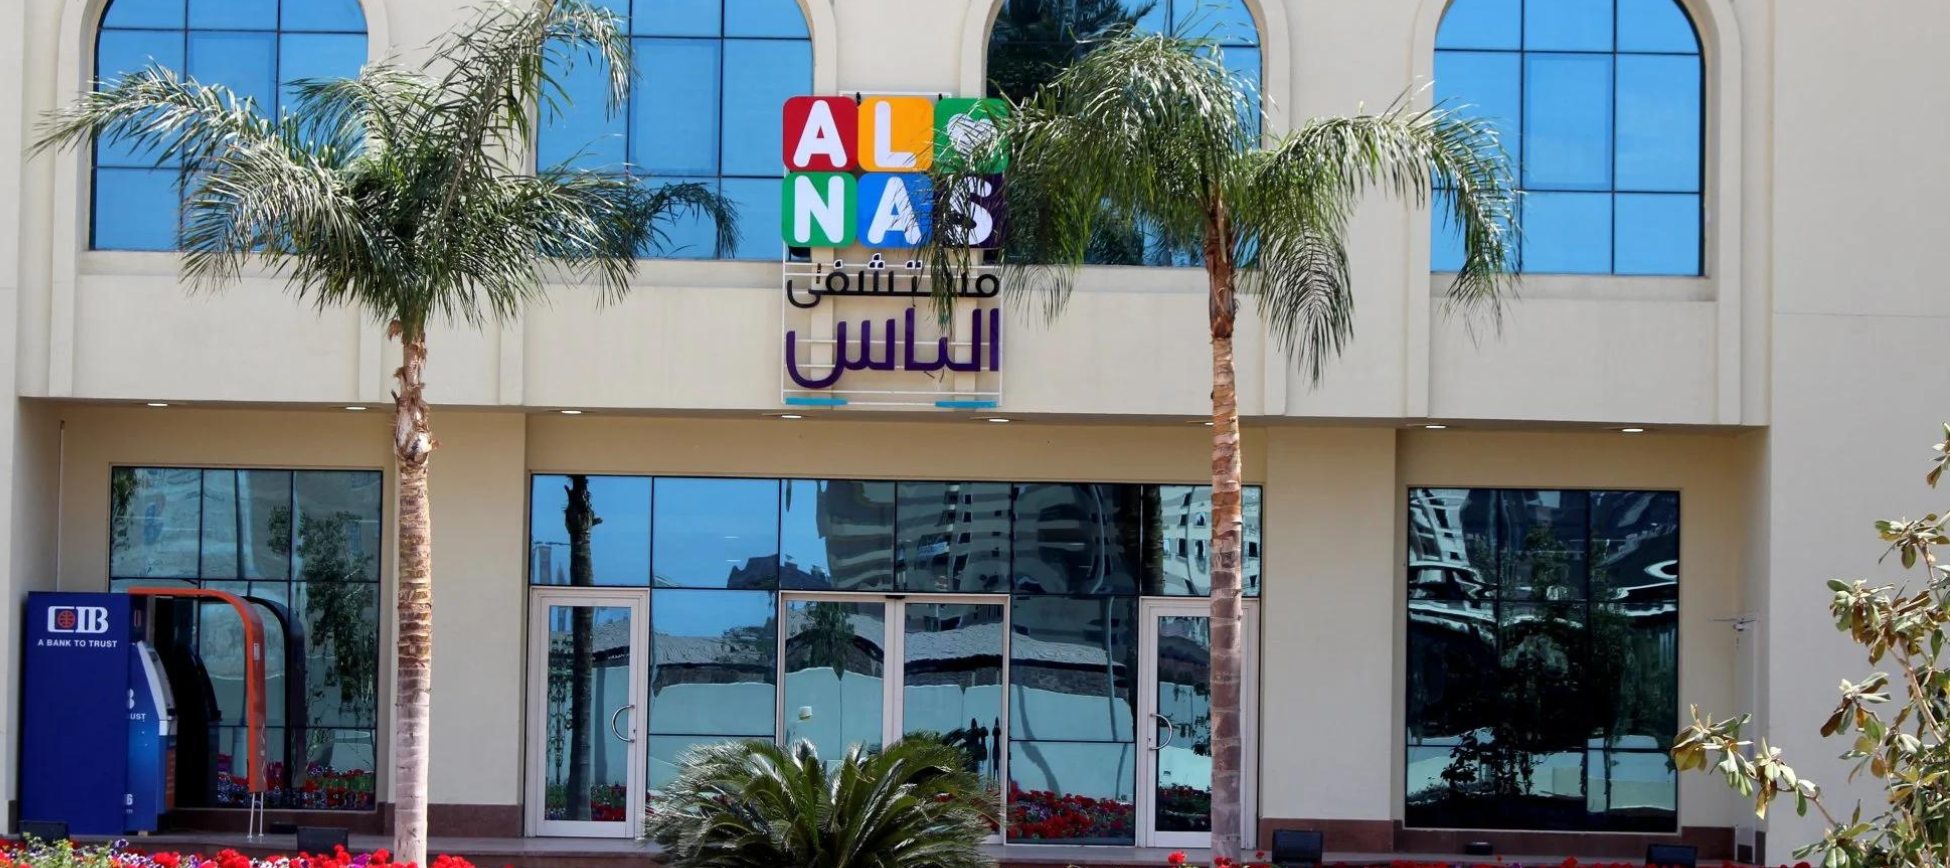 Al nas hospital is our Honorary Sponsor for the joy of every child’s heart in the world